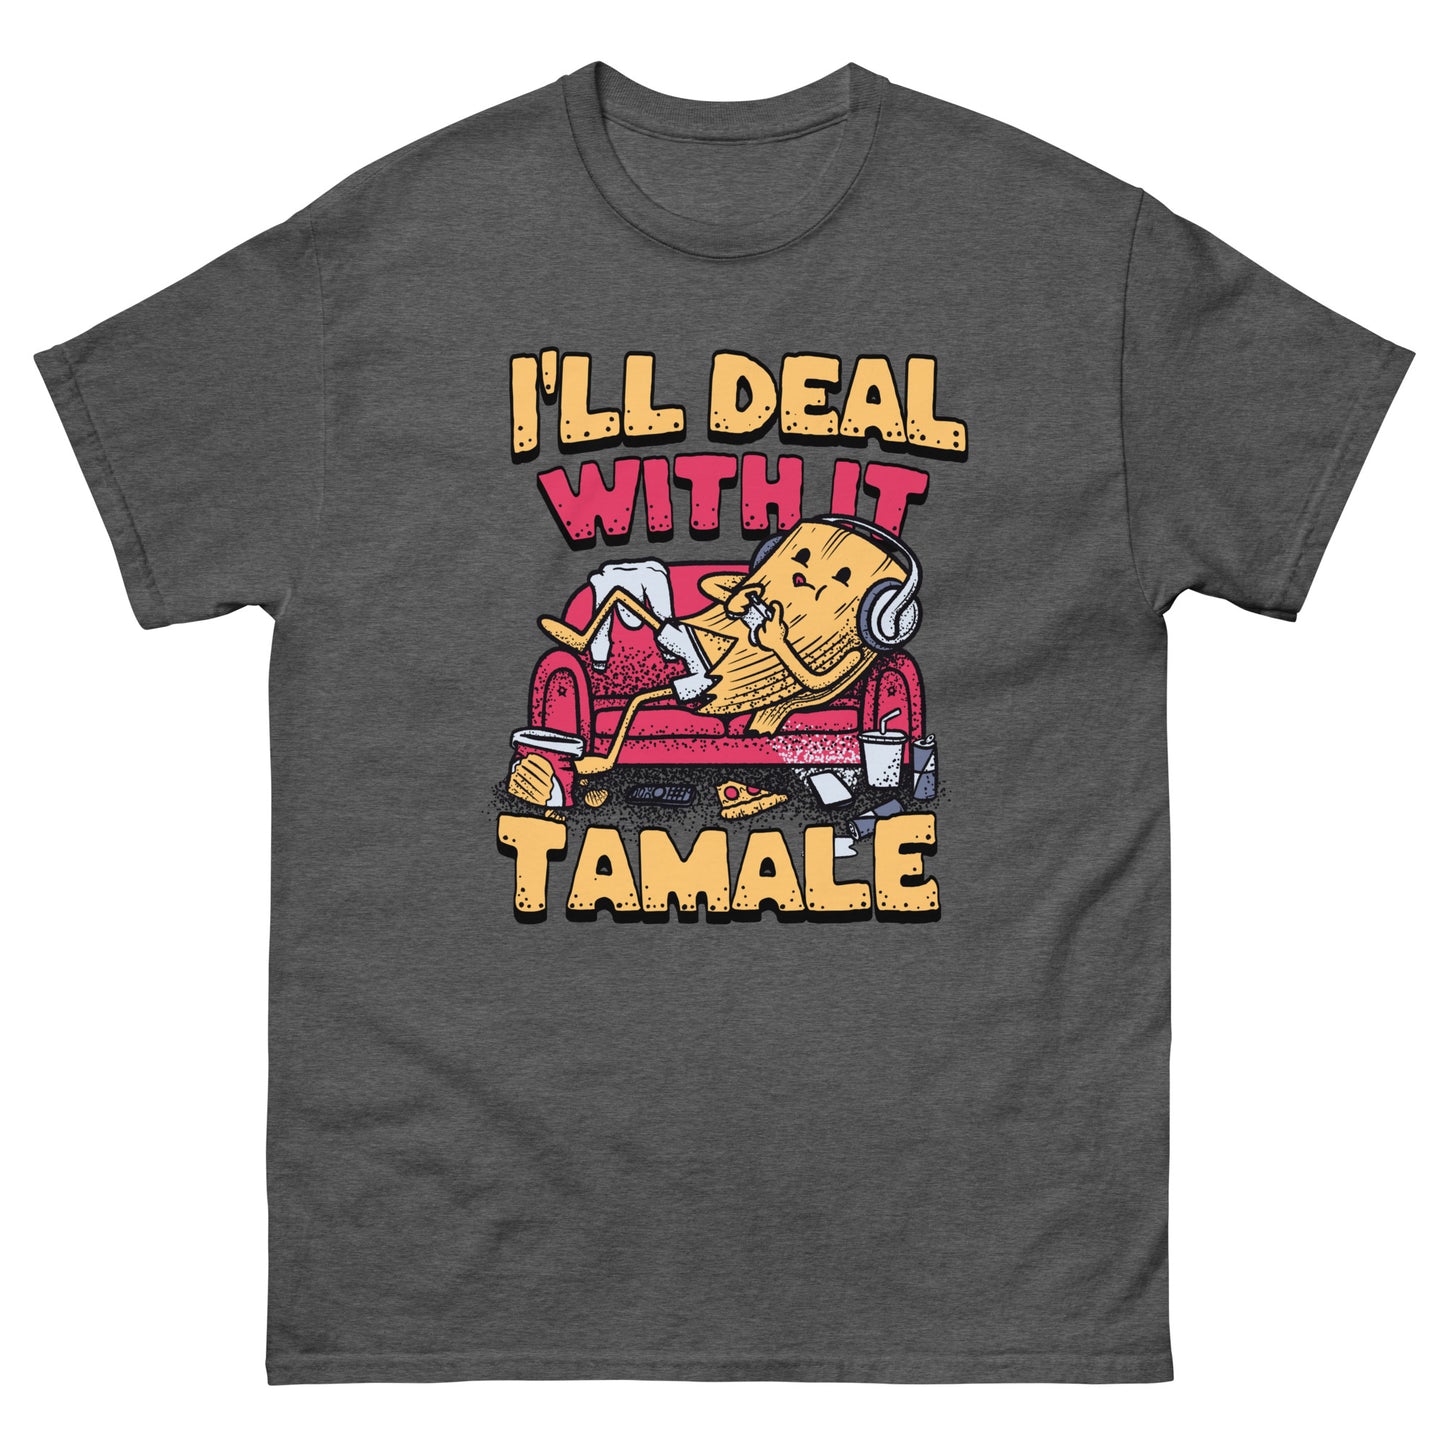 I'll Deal With It Tamale - Funny Mexican Food T-Shirt